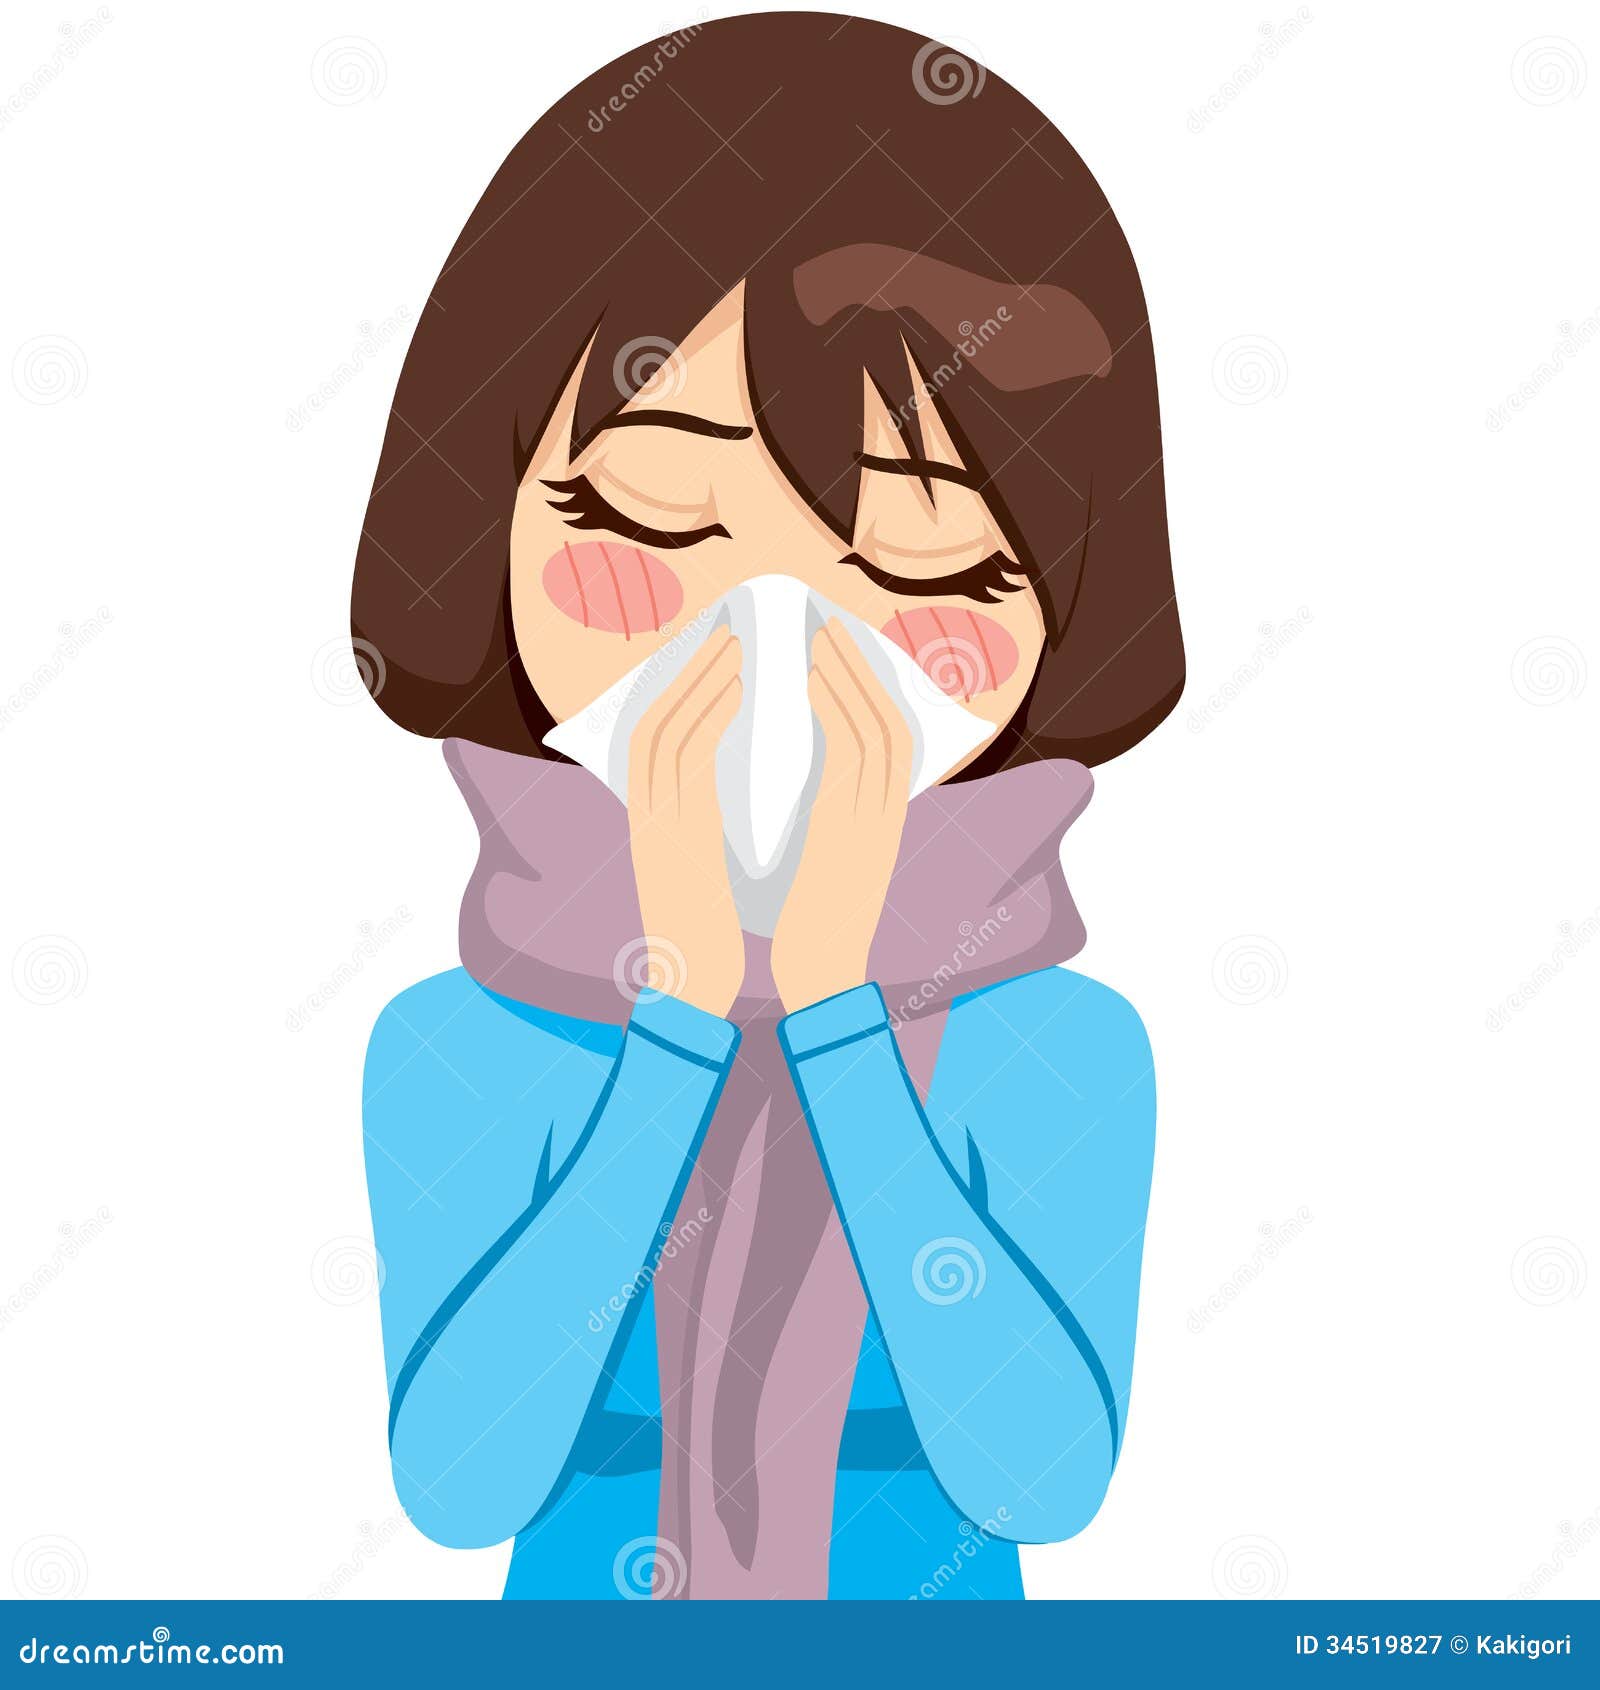 clipart runny nose - photo #38